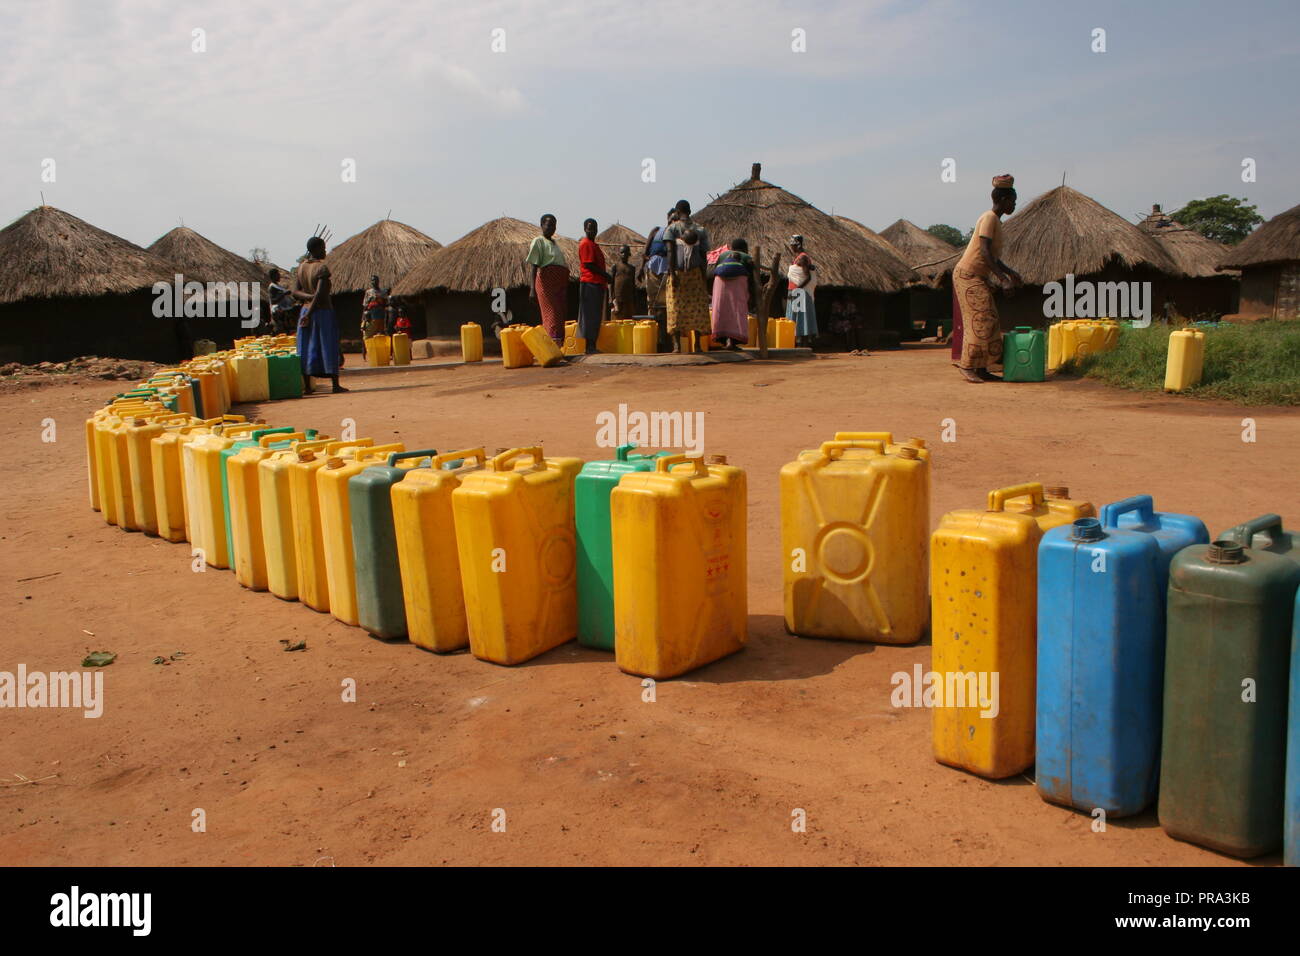 A long line of jerrycans wait to be filled at a single water borehole in Atiak internally displaced people's (IDP) camp, Northern Uganda. Stock Photo